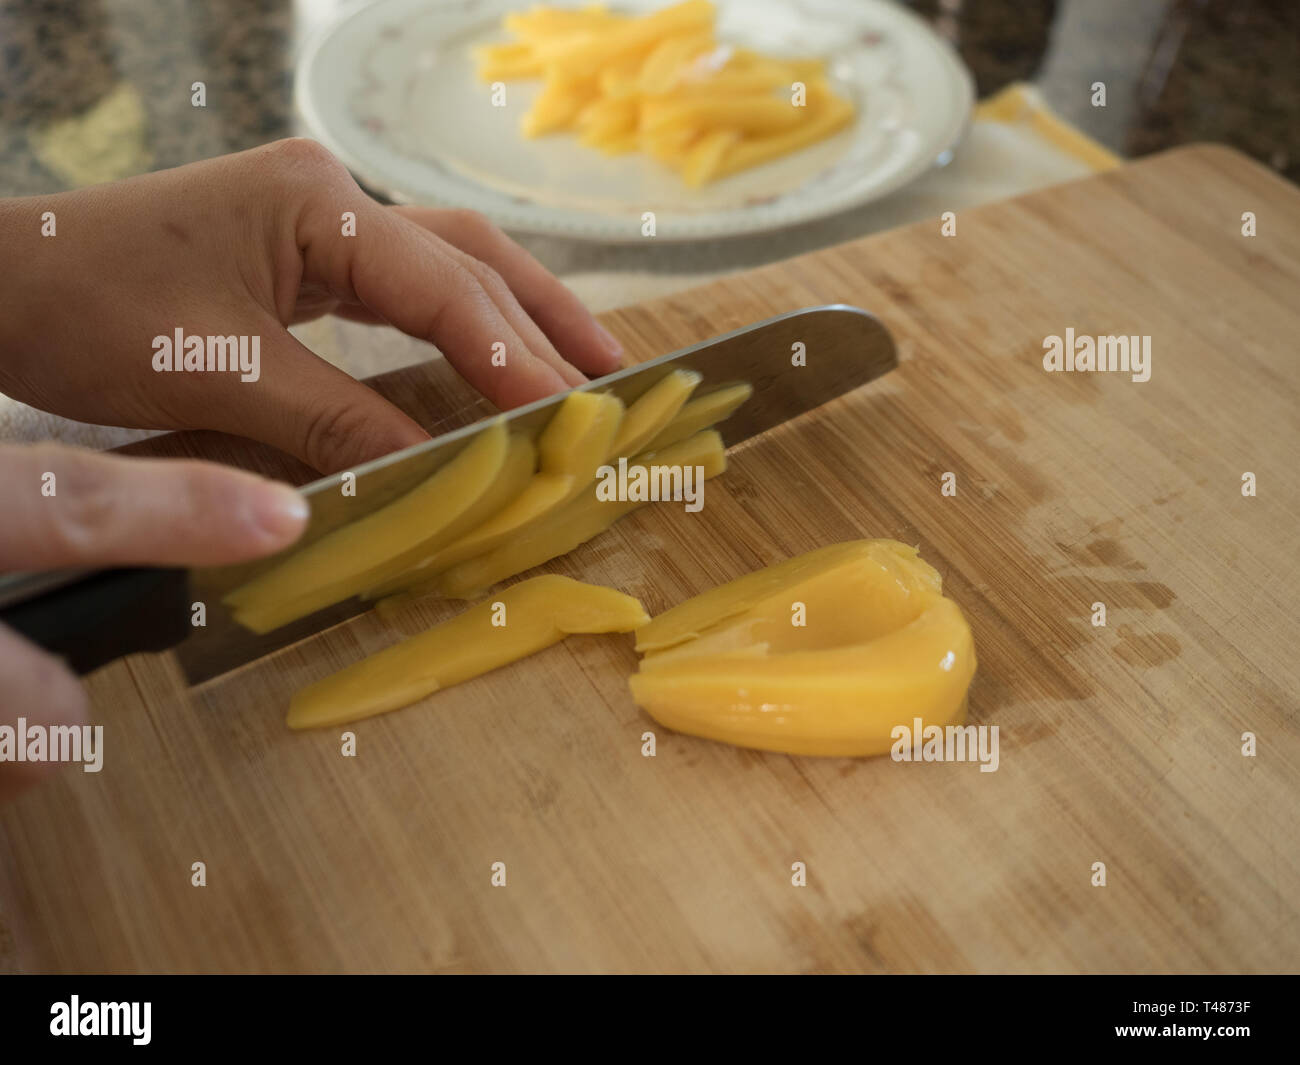 Slicing canned jackfruit on a wooden cutting board Stock Photo